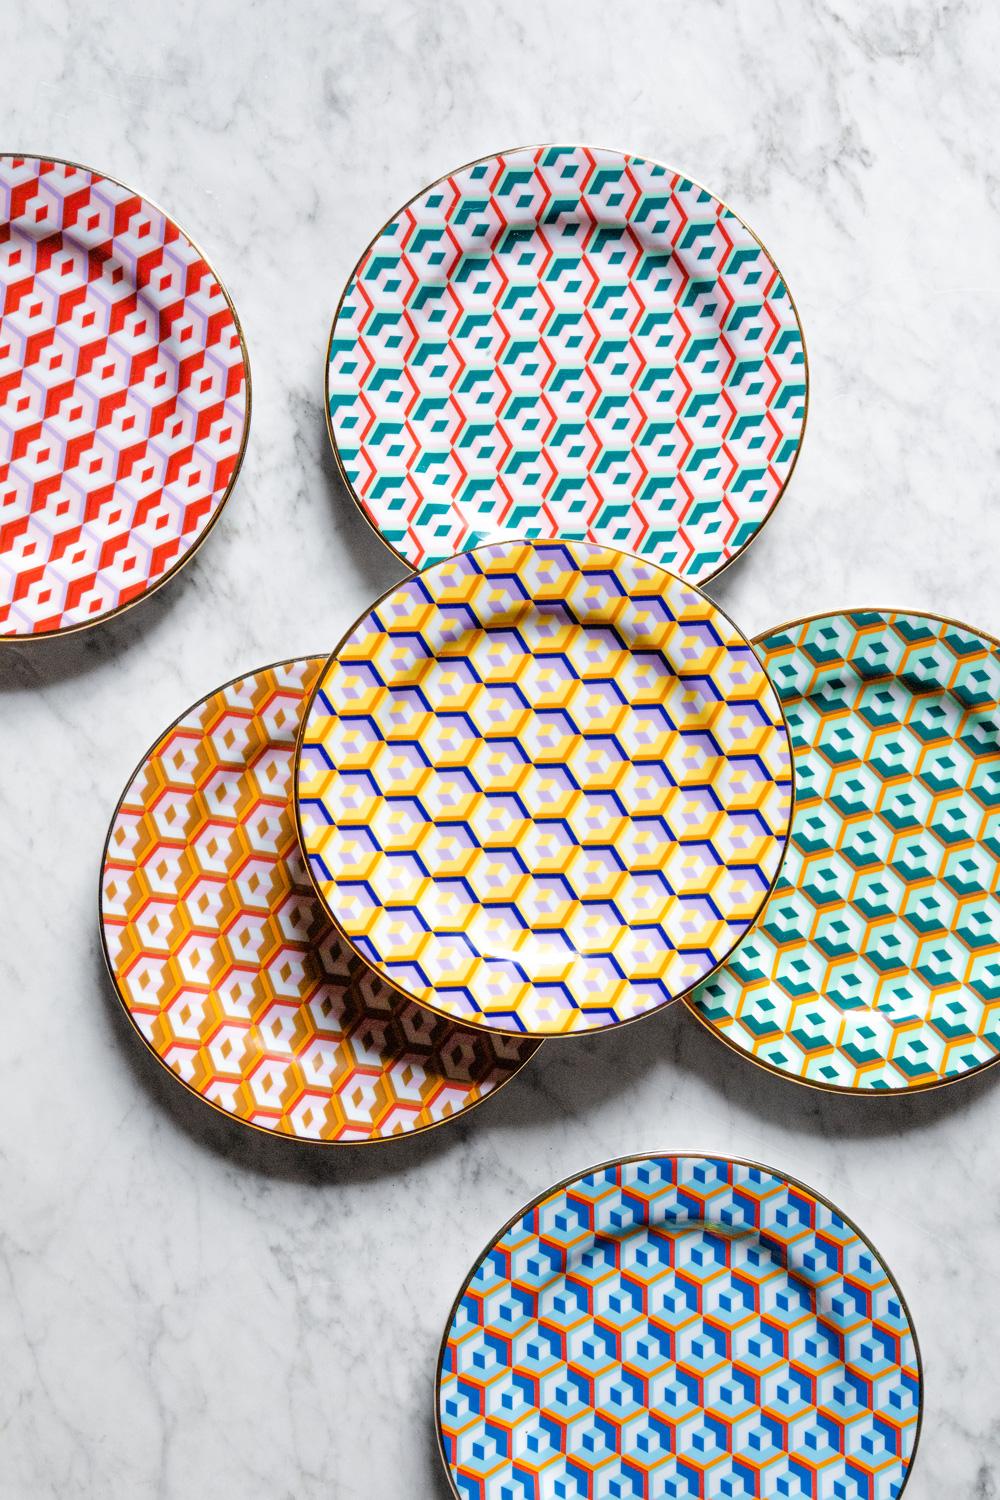 Part of our ravishingly retro collaboration with 1stDibs, this set-of-two Dessert Plates arrives in the vintage Cubi Giallo print crafted from fine porcelain by our historic Italian partners,Ancap. The 1stDibs collection offers six different color